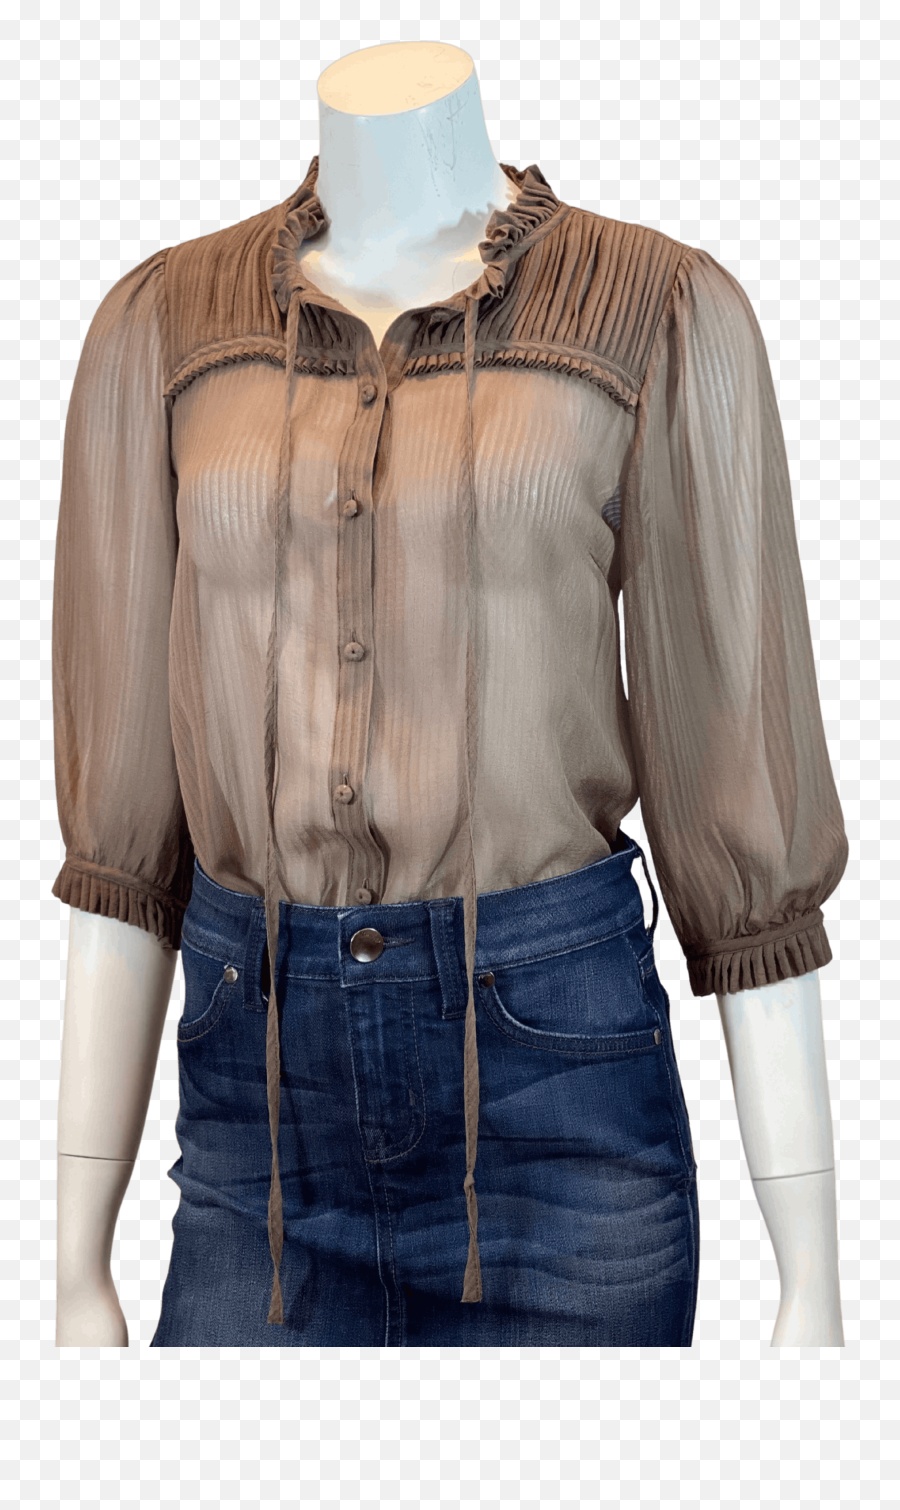 Sheer Pleated Blouse By Marc Jacobs In 2021 Pleated Blouse Emoji,Transparent Blouse